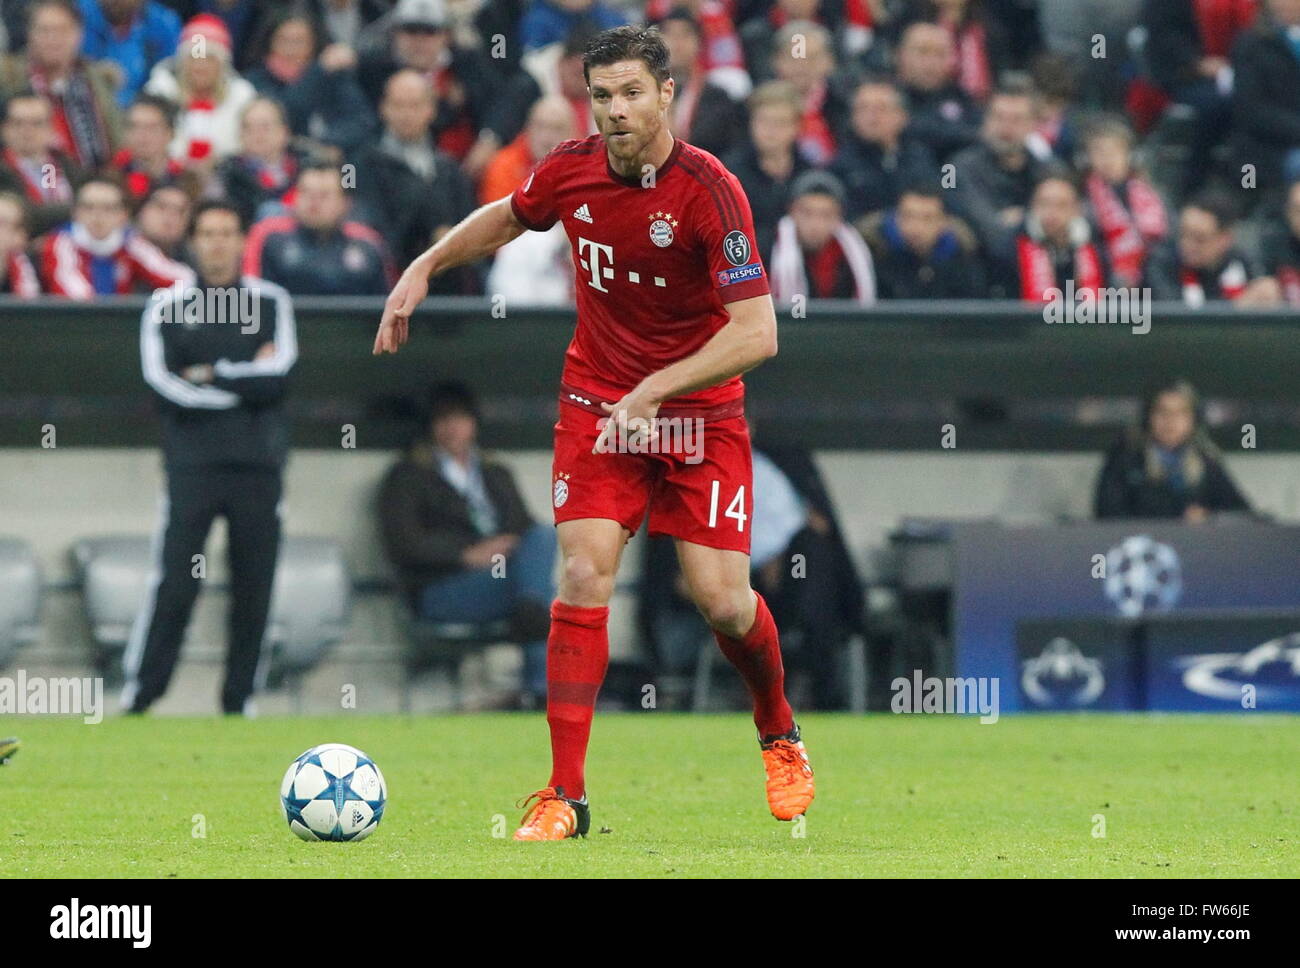 The action from the Allianz Arena in pictures